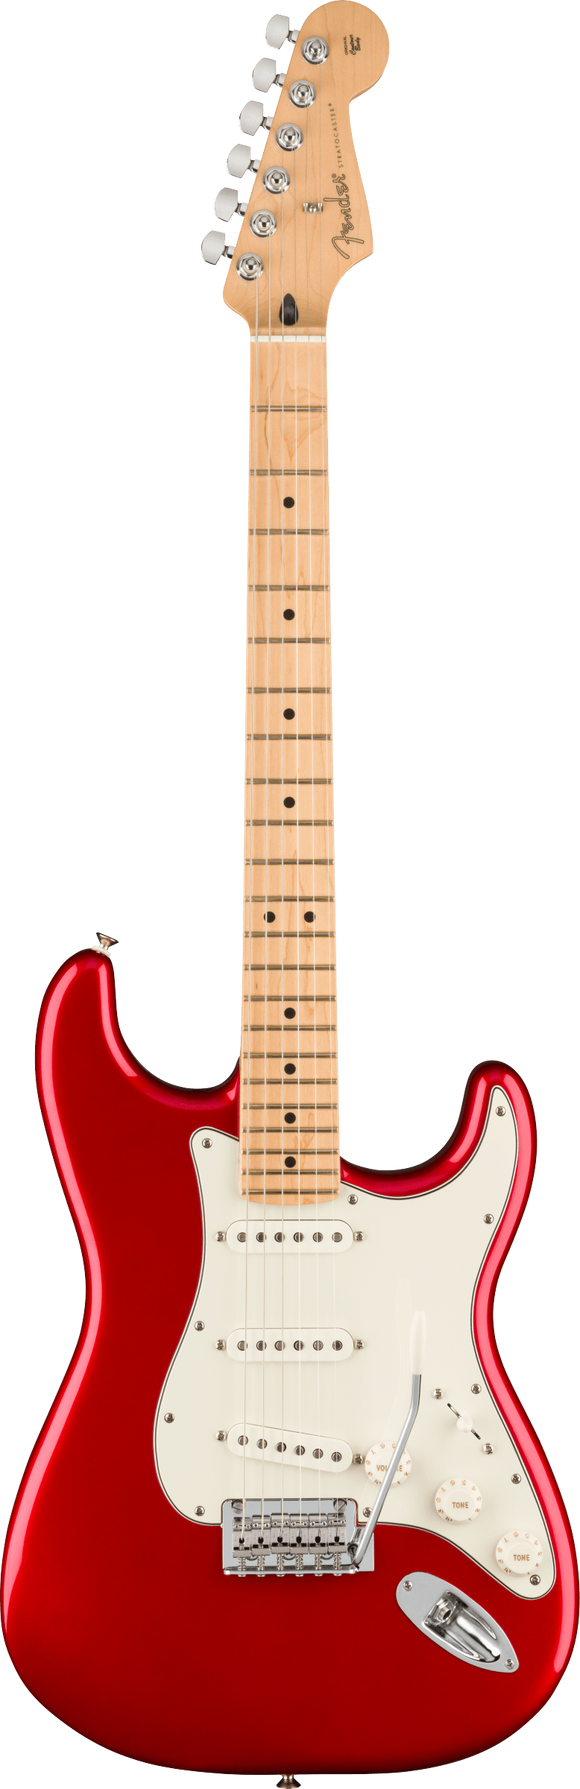 Fender Player Stratocaster, Maple Fingerboard, Candy Apple Red